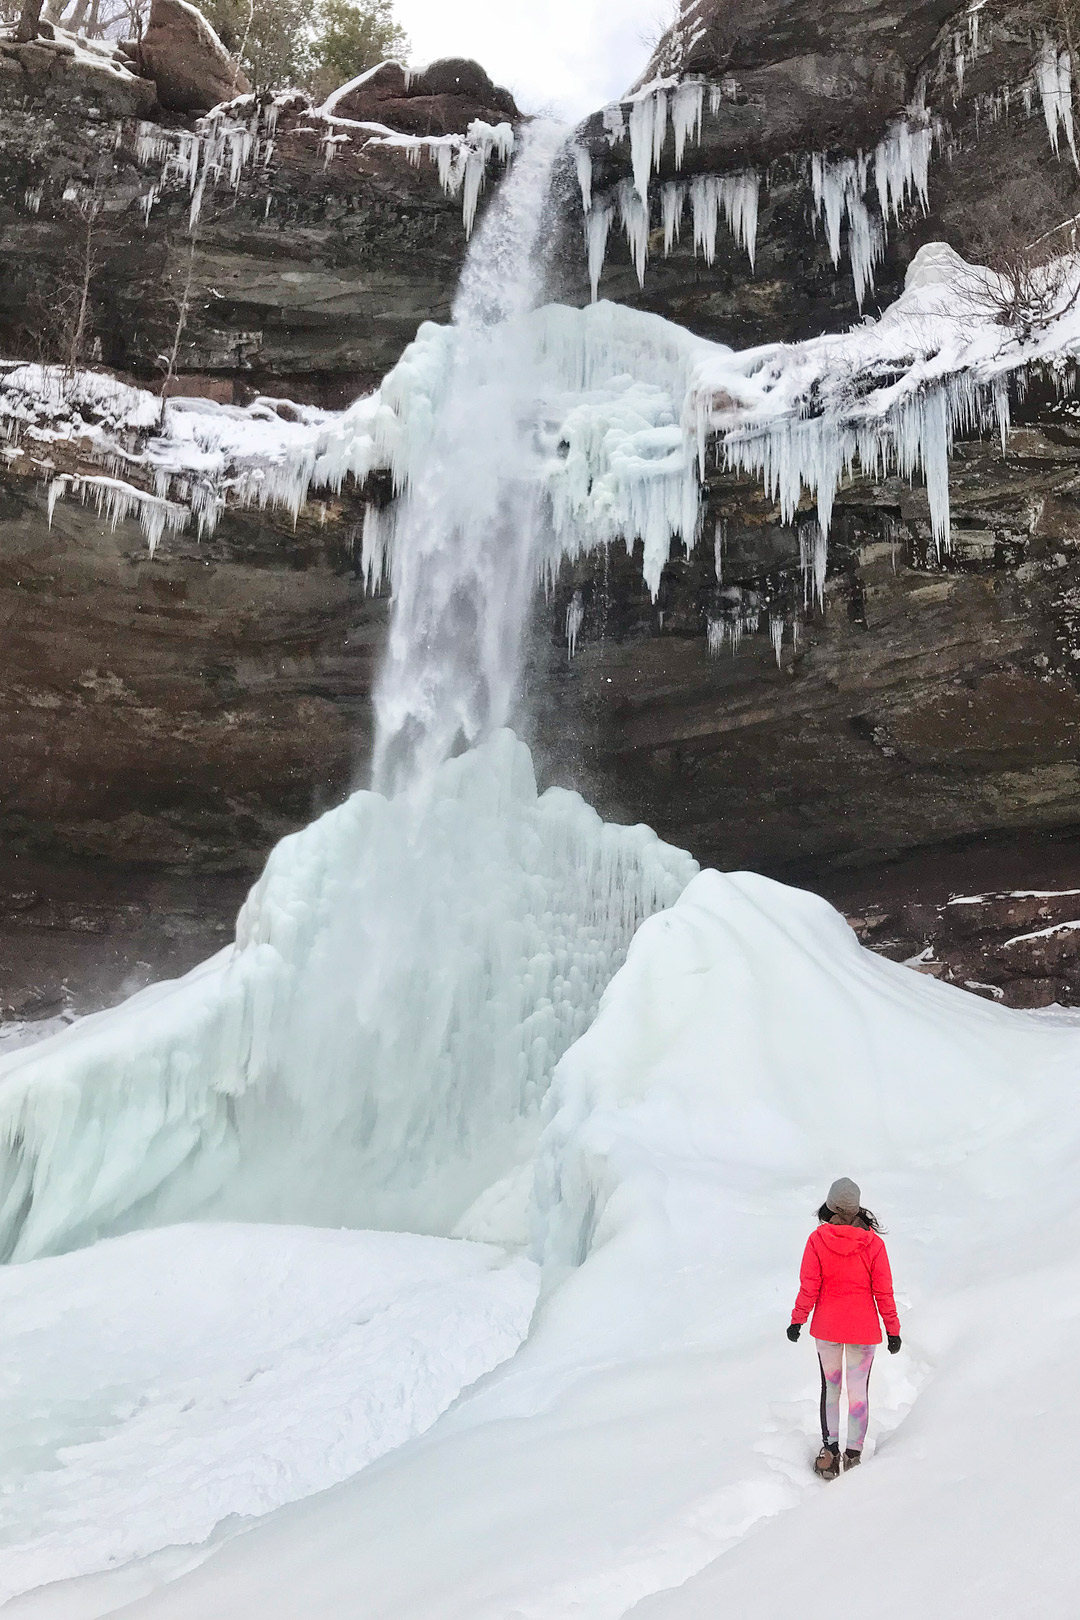 Want to plan some weekend trips from NYC? You need to save this pin and click through to check out the ultimate list of weekend getaways near NYC. No matter what season you're going, it includes winter weekend getaways from nyc, favorite summertime spots for the locals, and even the best cheap getaways from nyc (Pictured here is Kaaterskill Falls in Catskills NY) // Local Adventurer #hunter #iloveny #newyork #ny #visittheusa